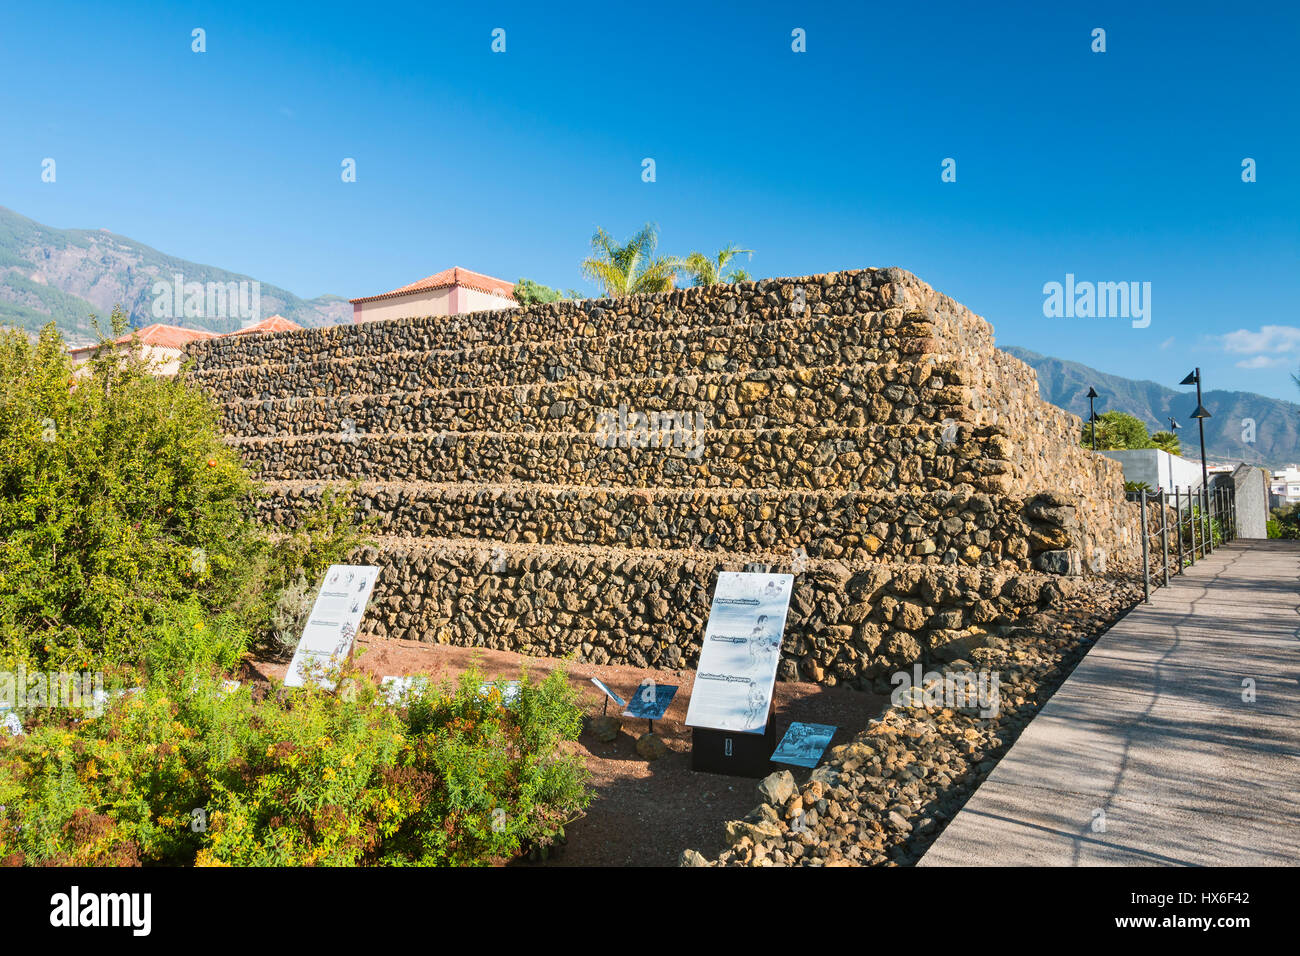 TENERIFE - OCTOBER 14: The ancient Pyramids of Guimar in Tenerife, Spain on October 14, 2014 Stock Photo